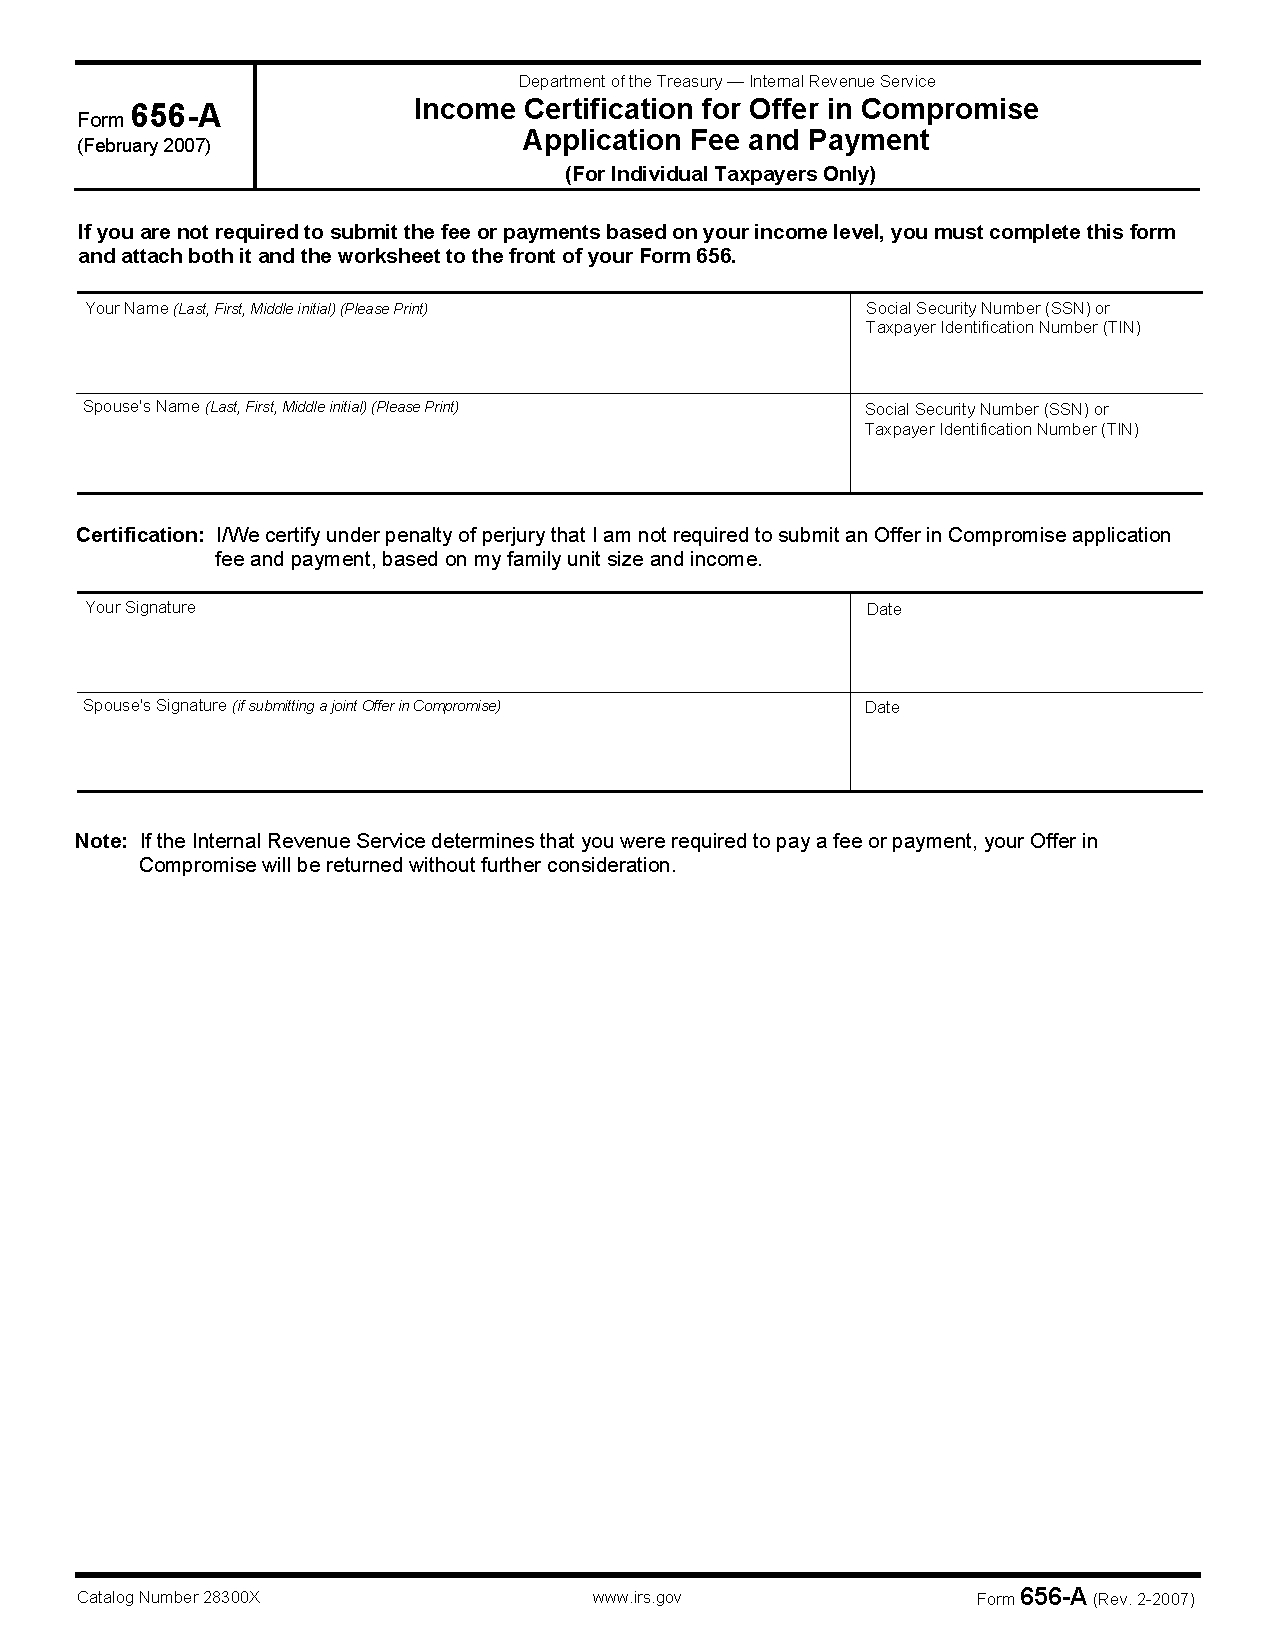 Offer In Compromise Application Fee And Payment Worksheet